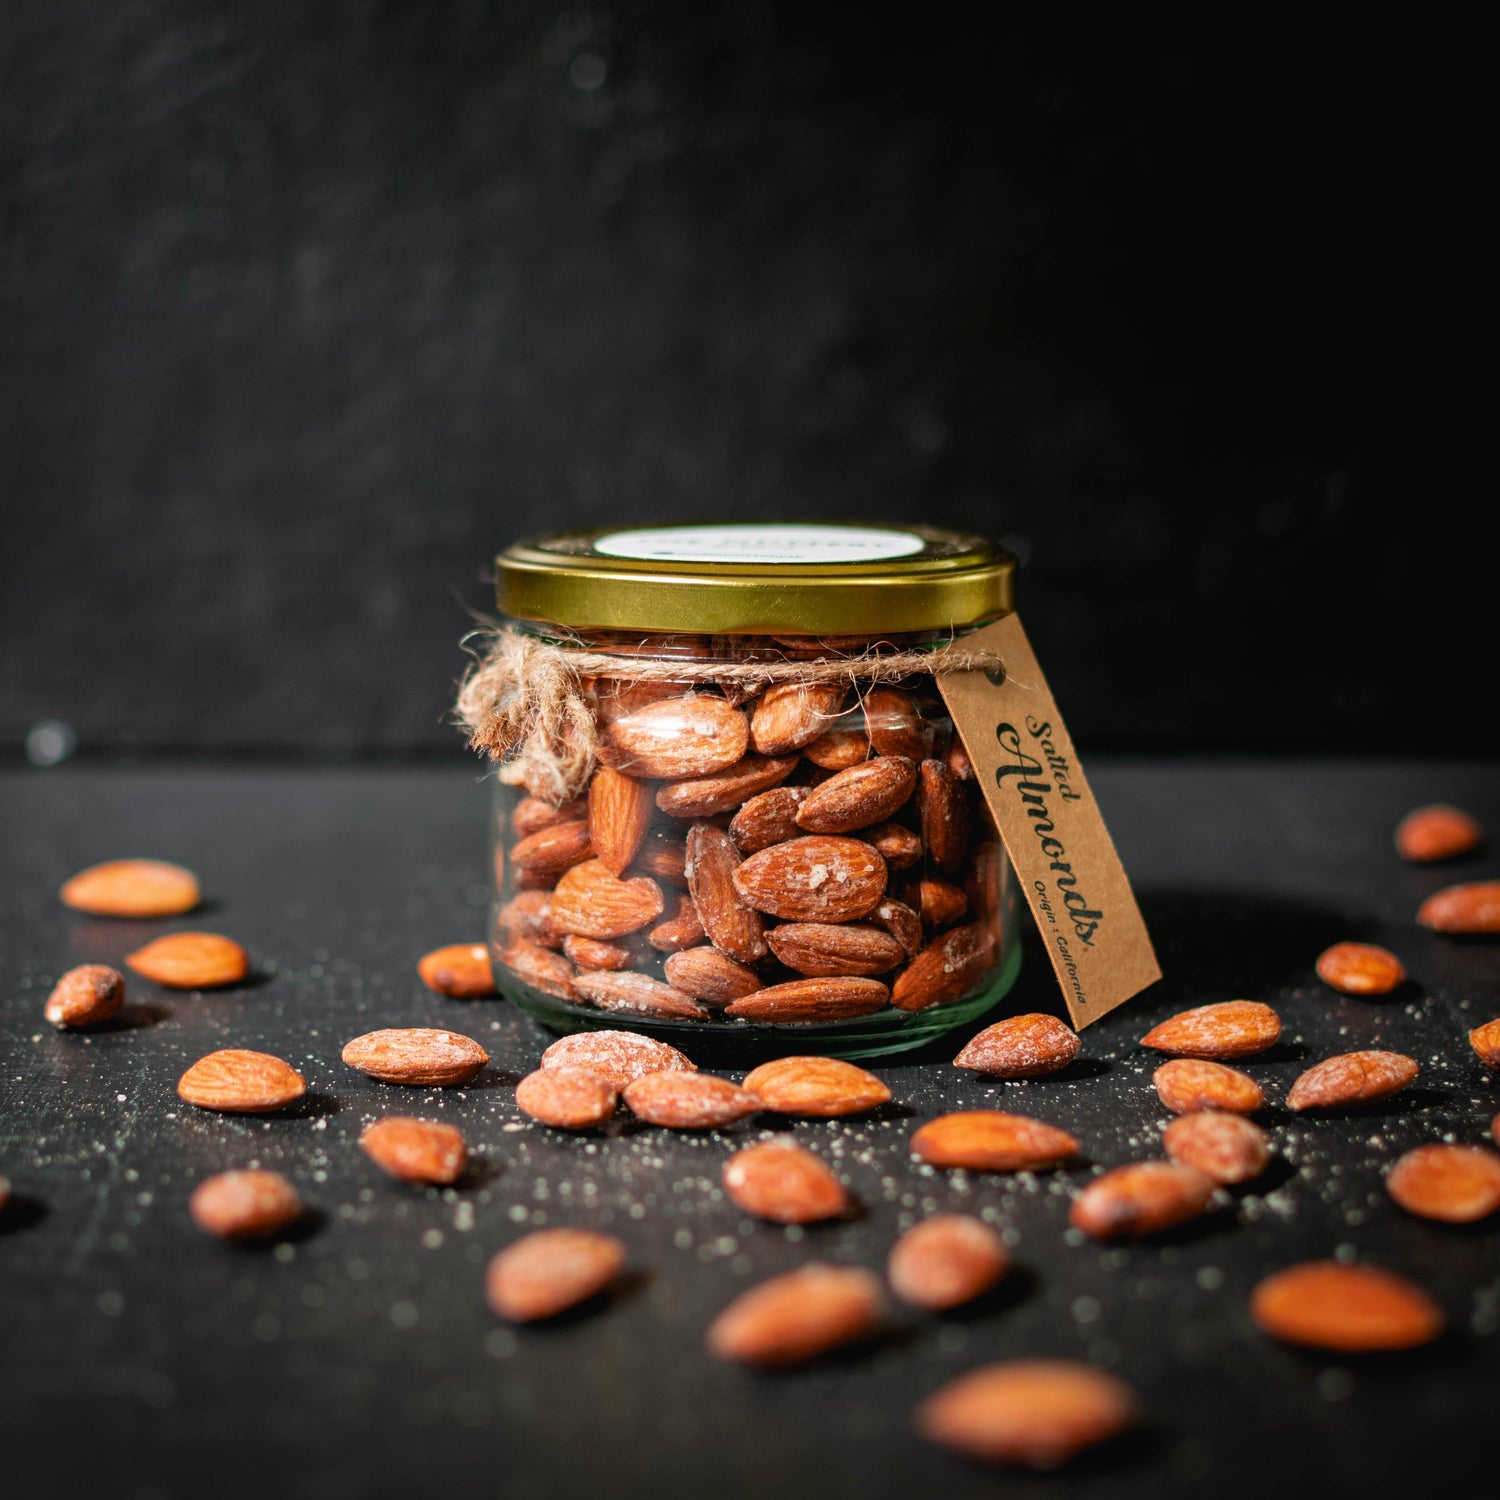 Salted Almonds - The Nuttery